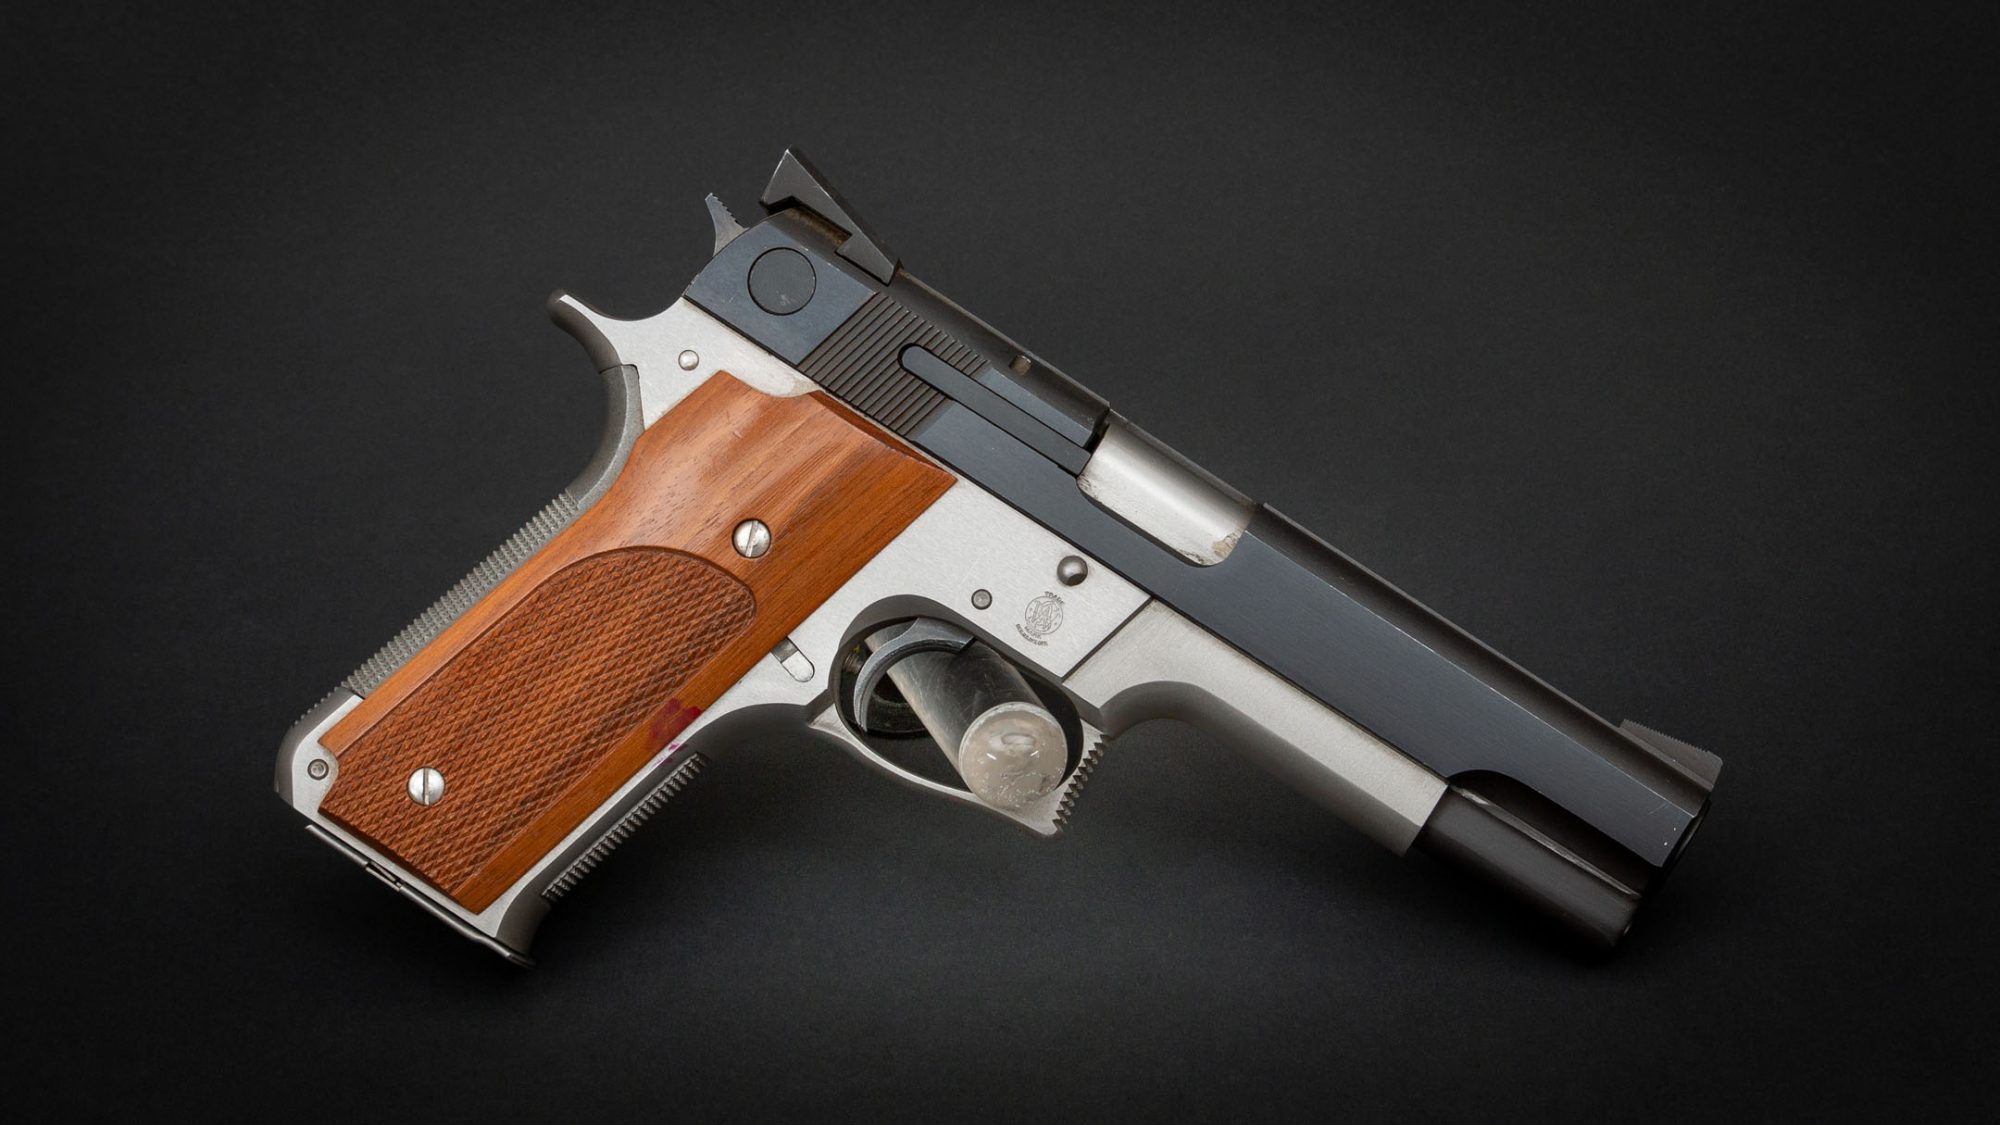 Smith & Wesson Model 745 in 45 ACP, for sale by Turnbull Restoration Co. of Bloomfield, NY